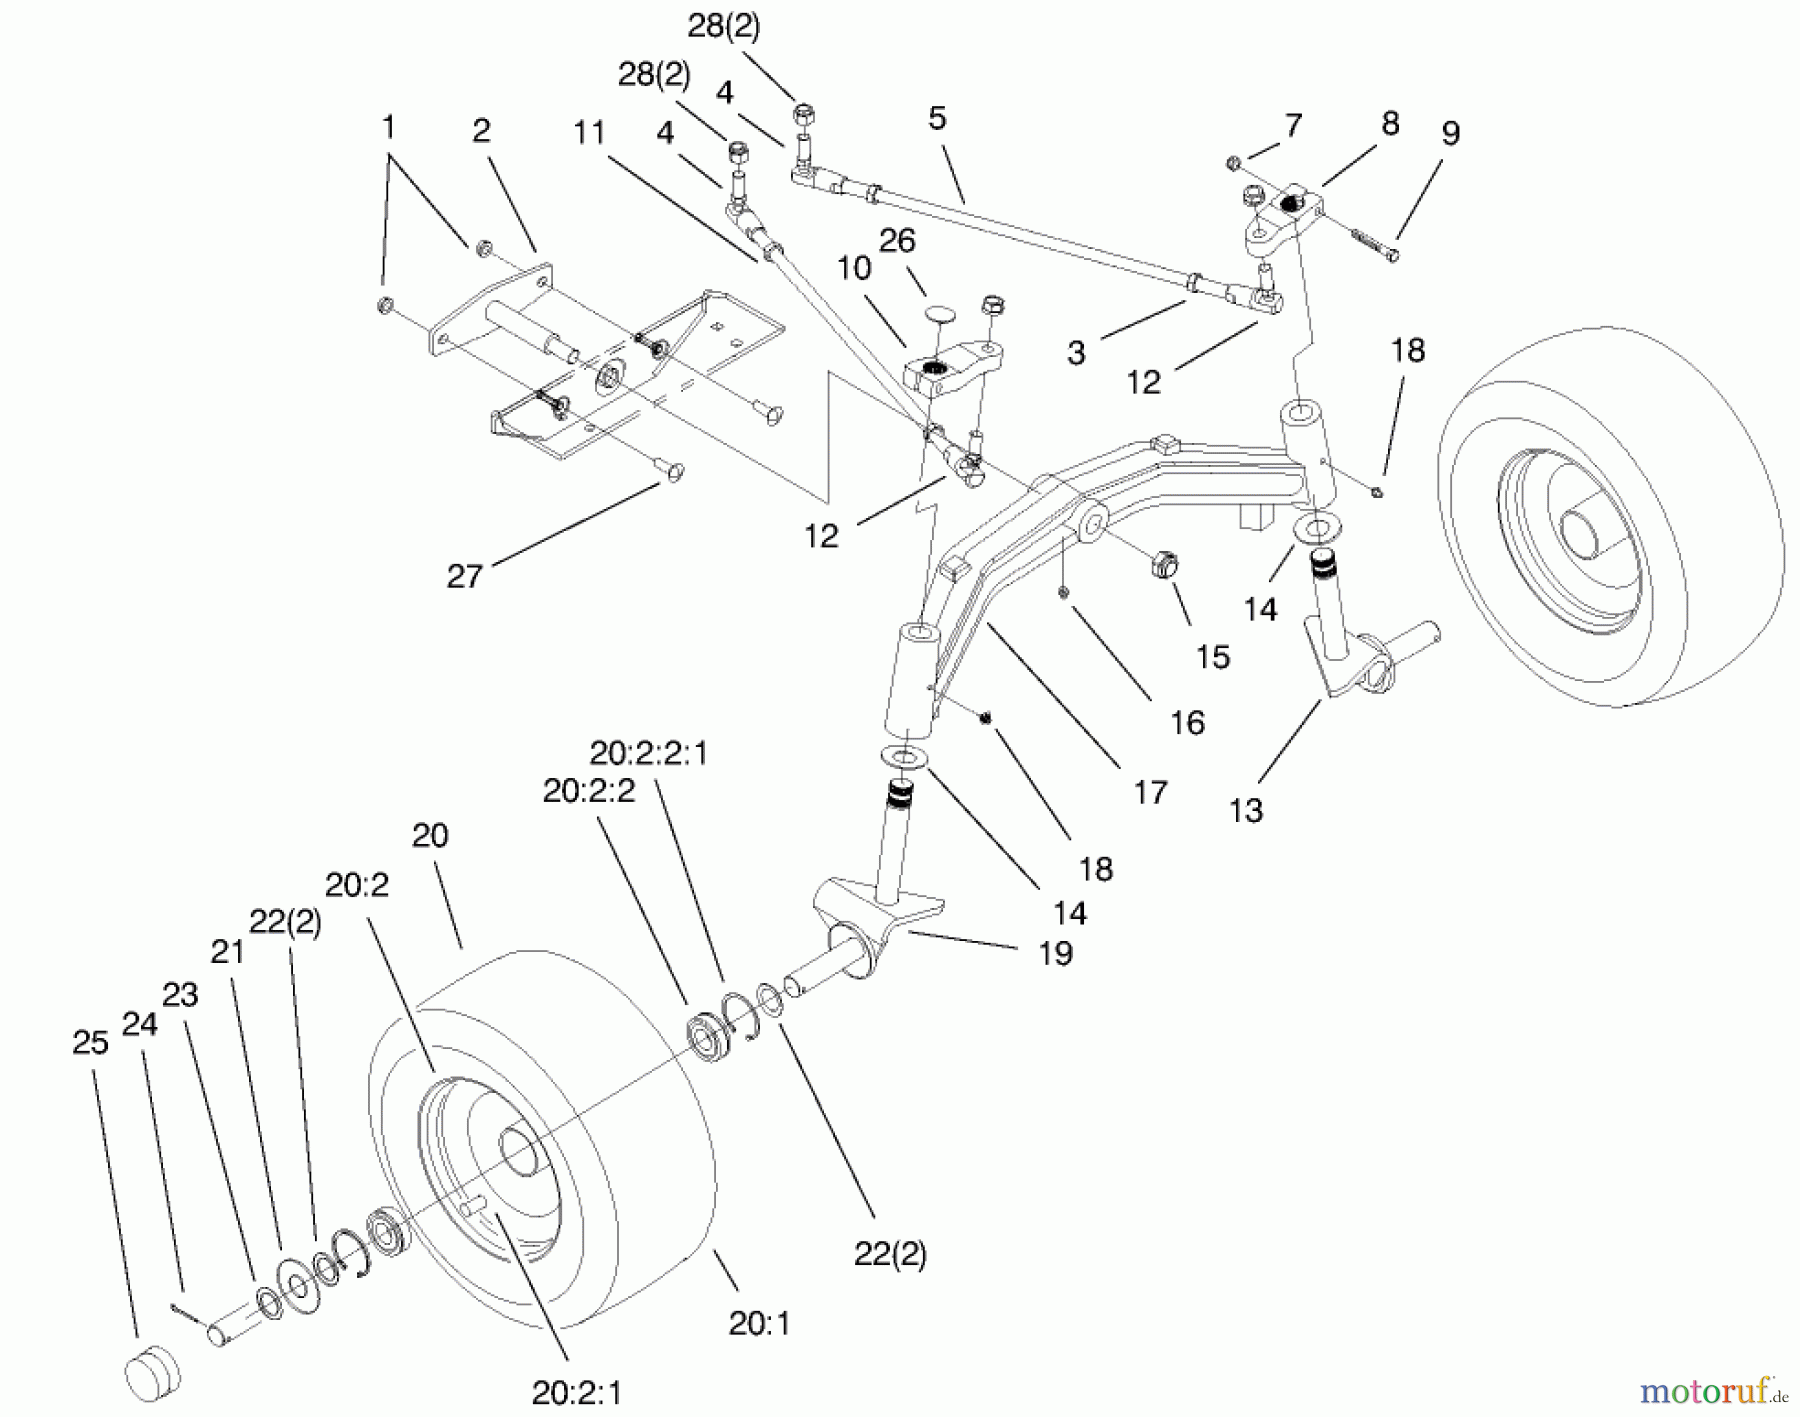  Toro Neu Mowers, Lawn & Garden Tractor Seite 1 73561 (522xi) - Toro 522xi Garden Tractor, 2000 (200000201-200999999) TIE RODS, SPINDLE, & FRONT AXLE ASSEMBLY